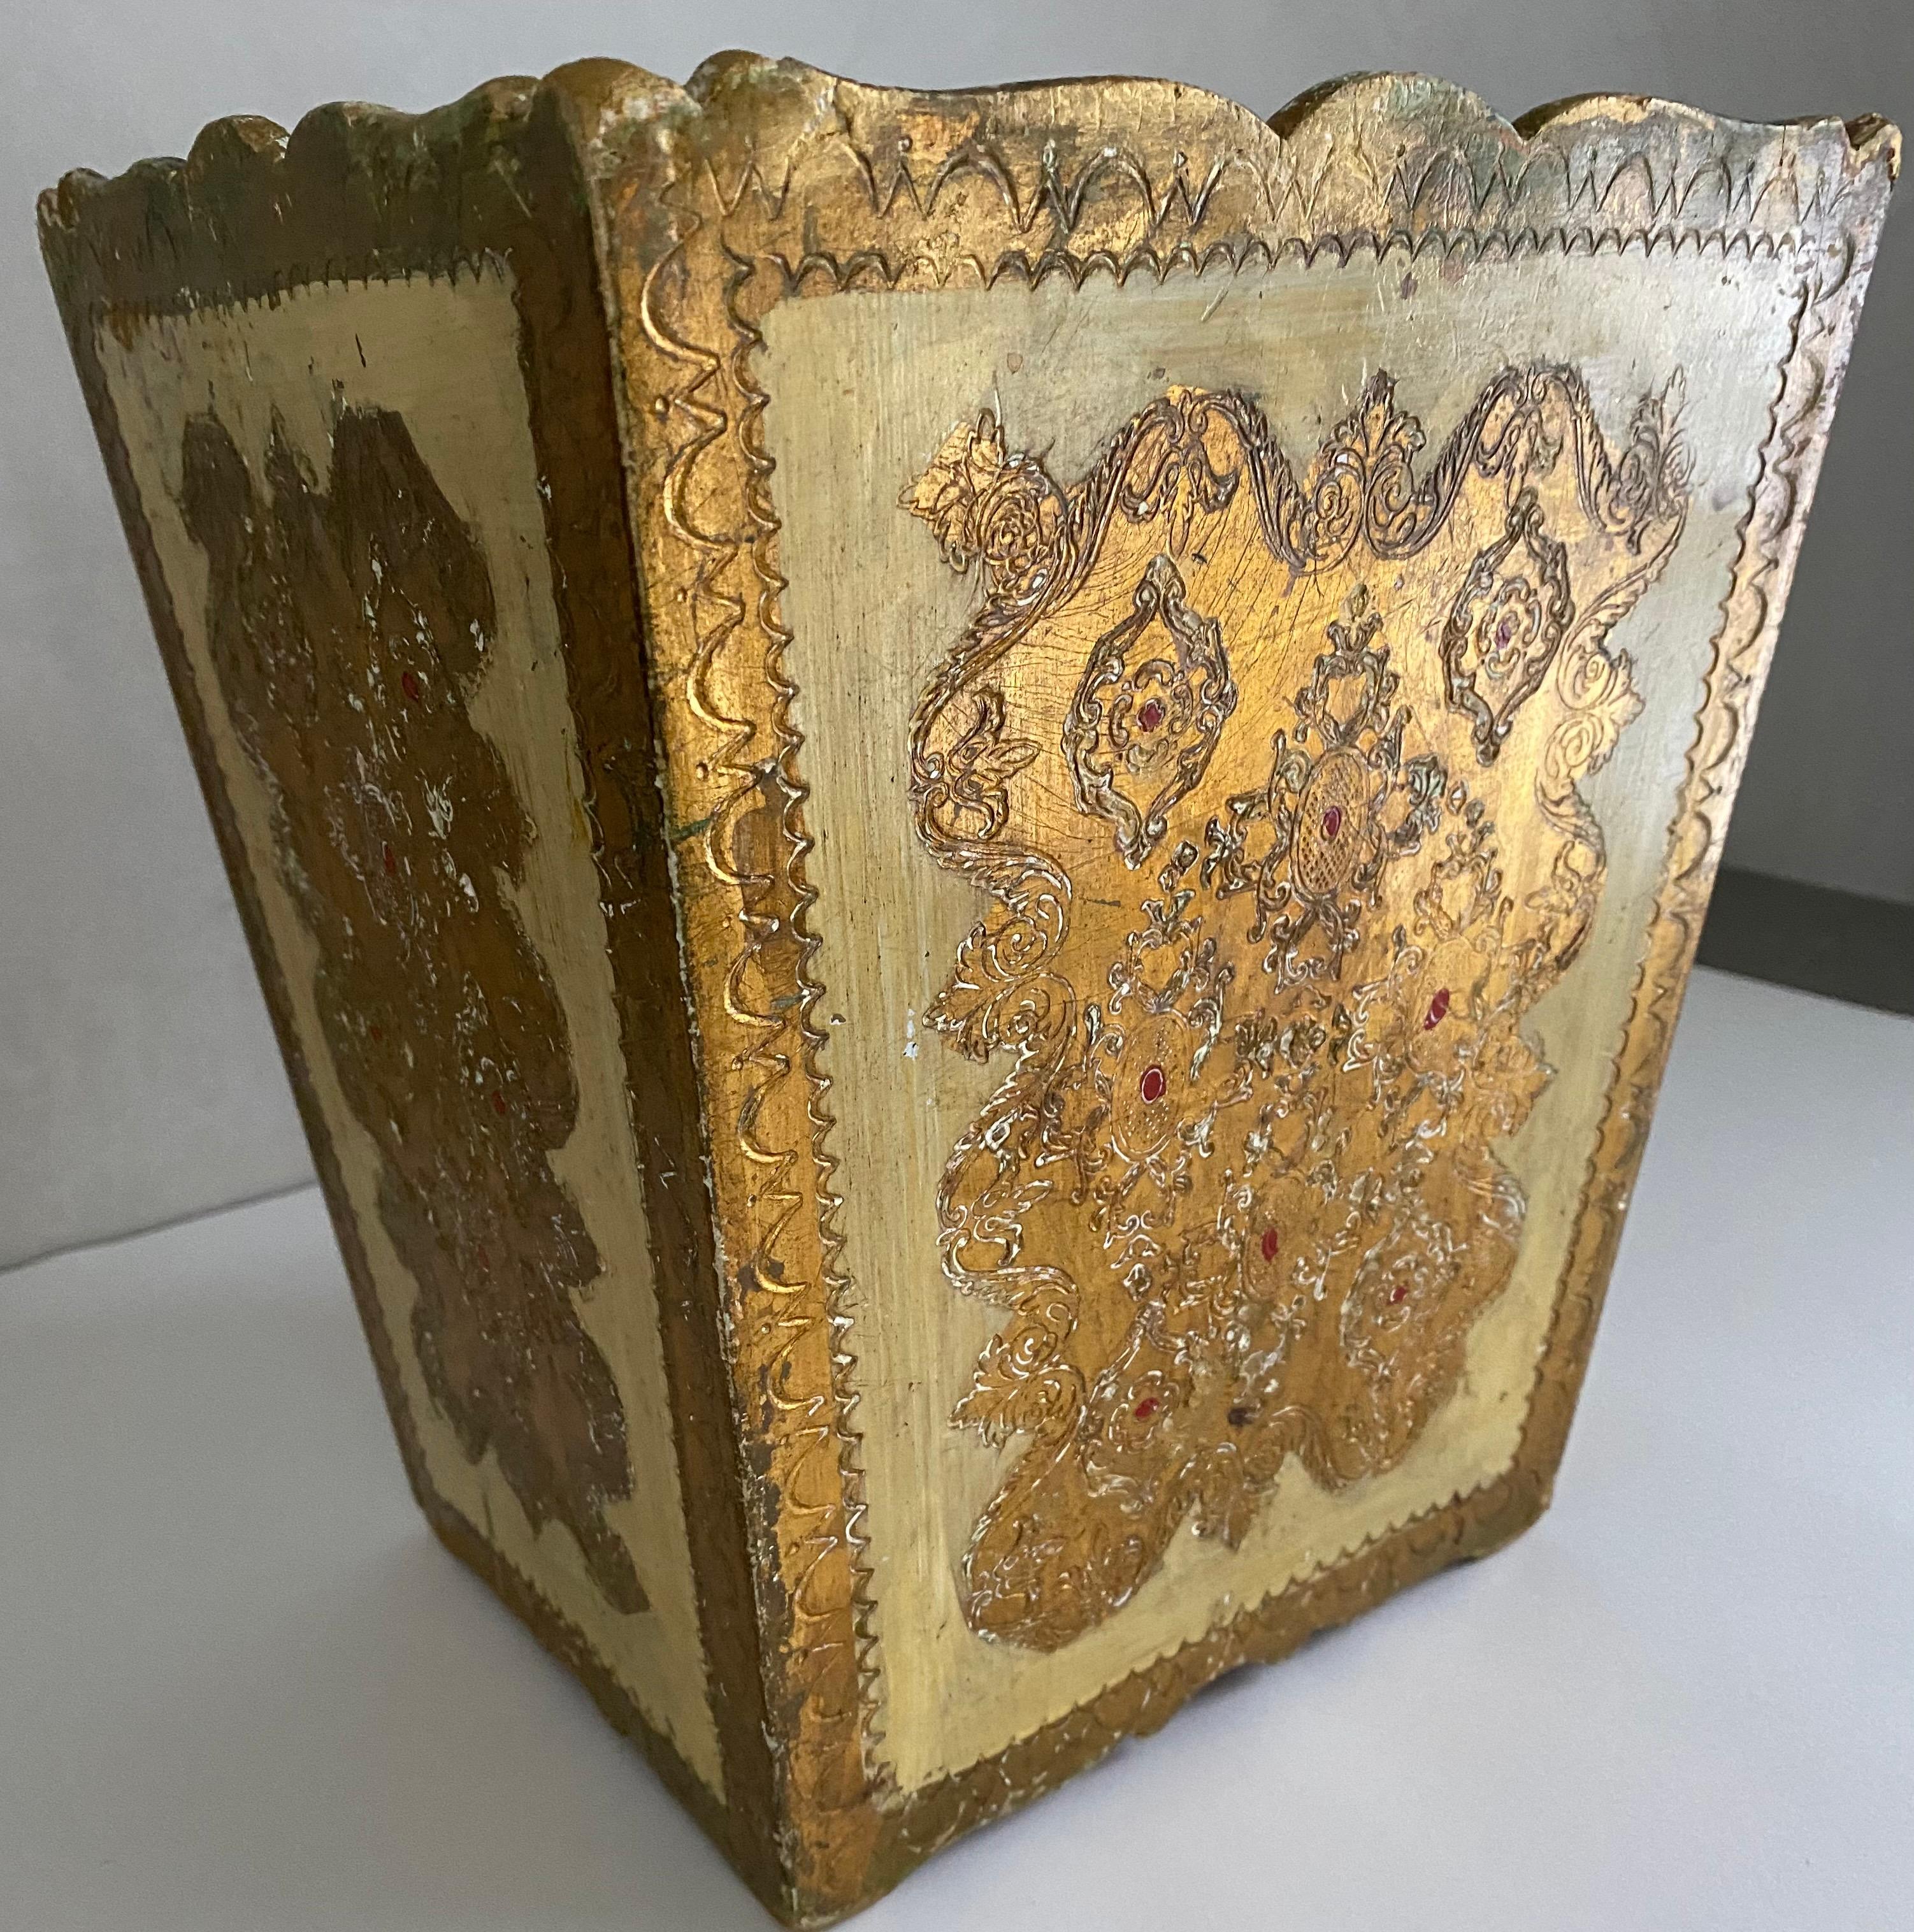 Elegant gilt decorated Italian neoclassical Florentine waste basket in creme background and intricate gold engraved patterned design. Wonderful addition to an office, bedroom bath or powder room.
  